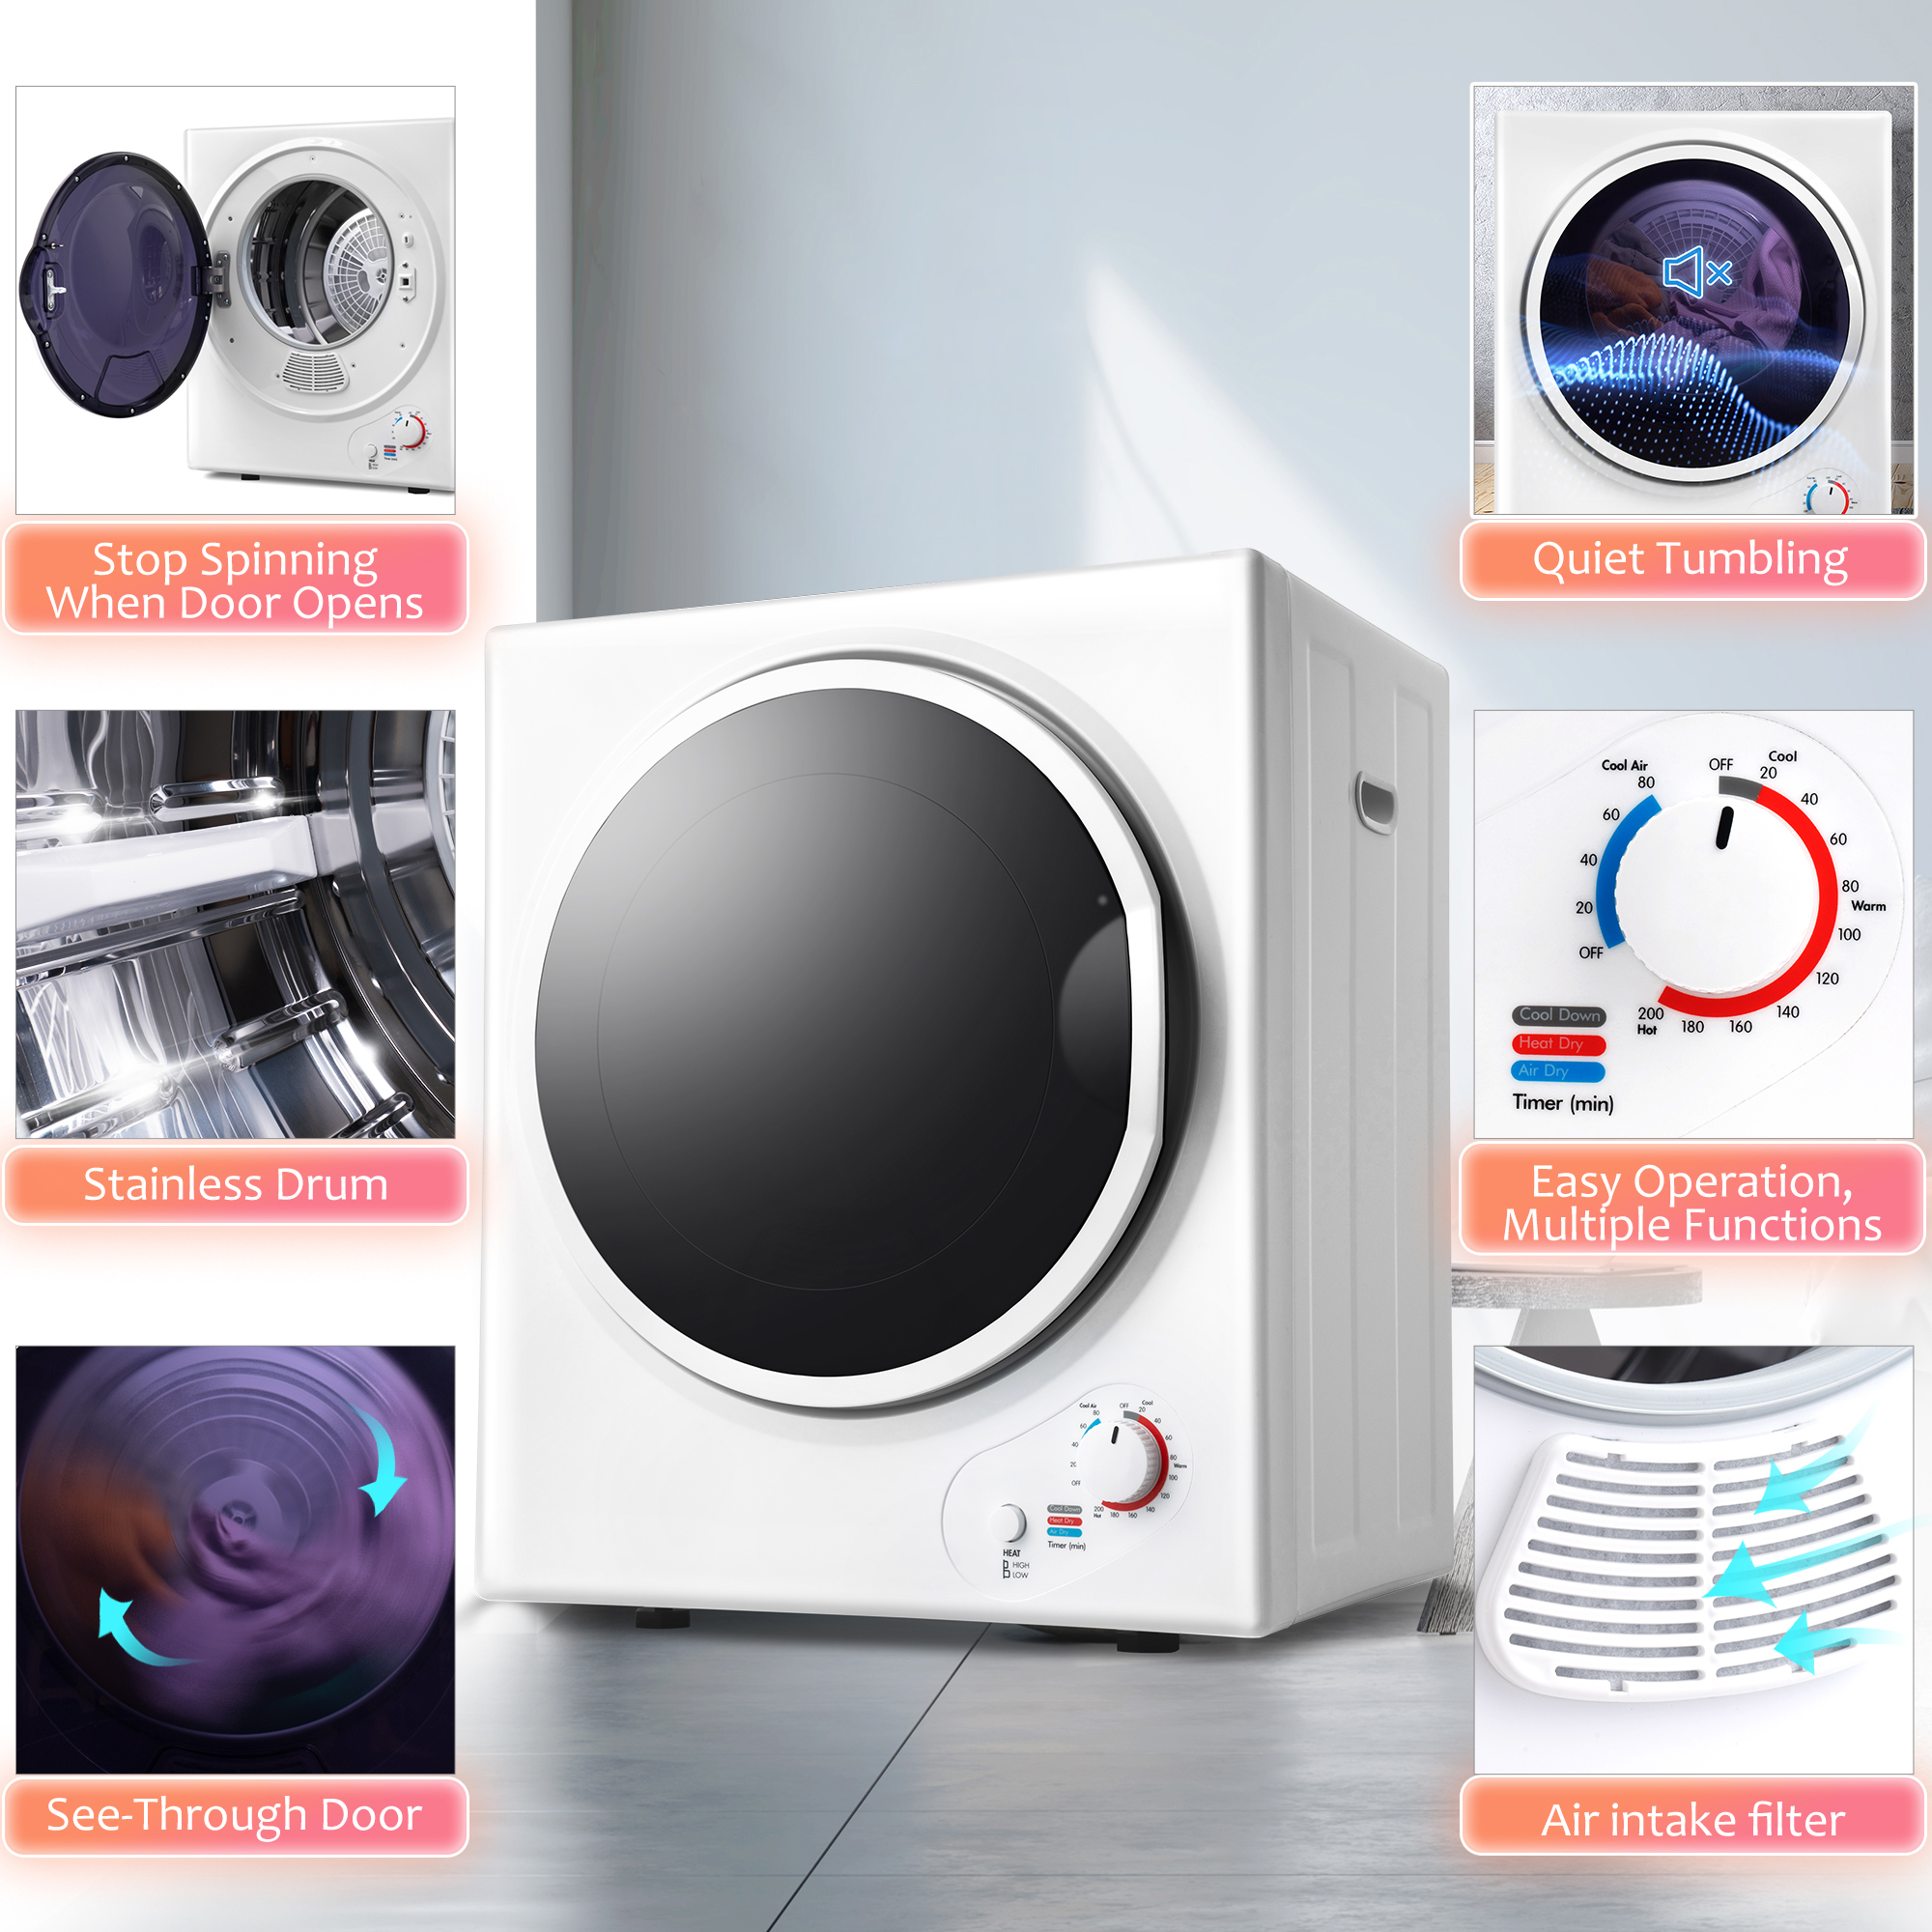 Compact Laundry Dryer, 850W Portable Clothes Dryer with 5 Drying Modes,  Front Load Electric Clothes Dryer Machine for Apartments, Dormitory, RVs